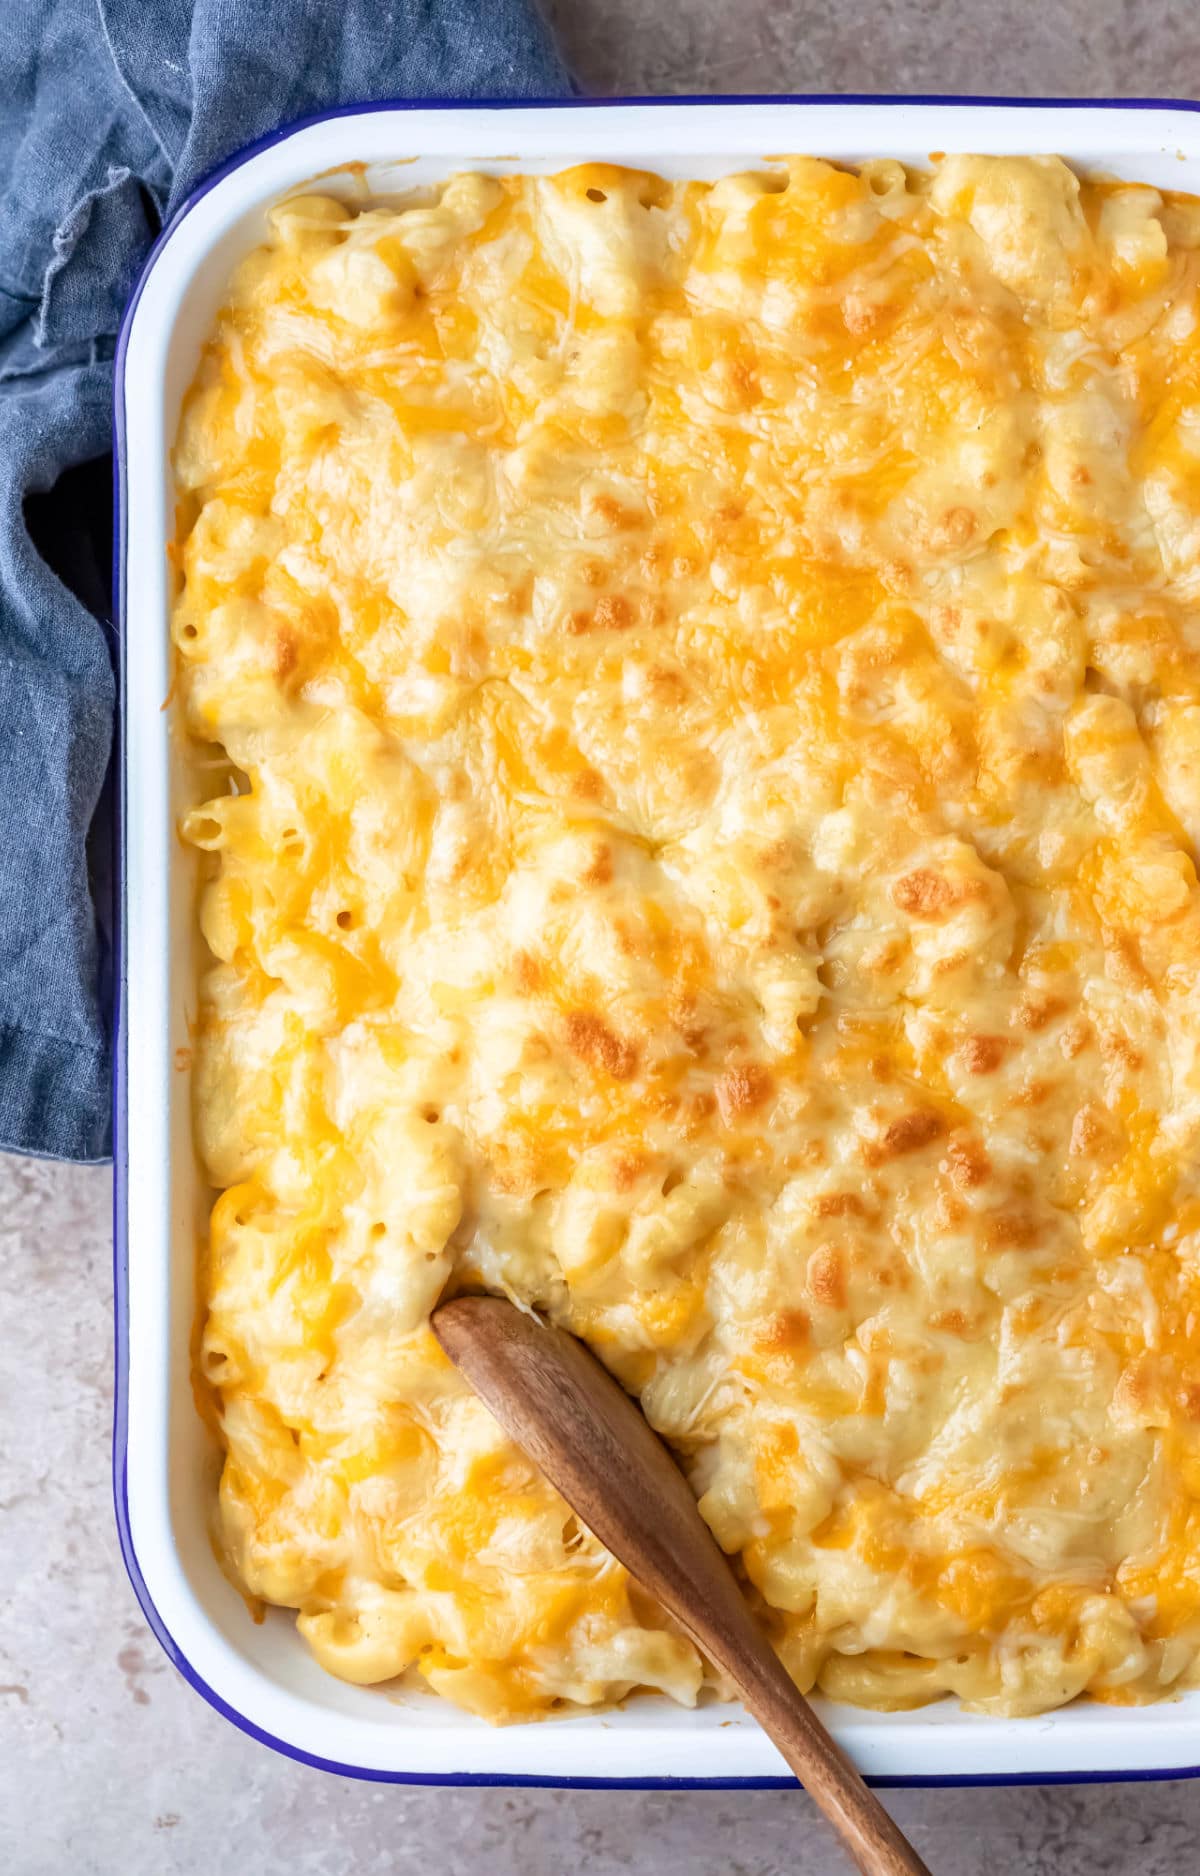 Pan of baked mac and cheese next to a blue linen napkin